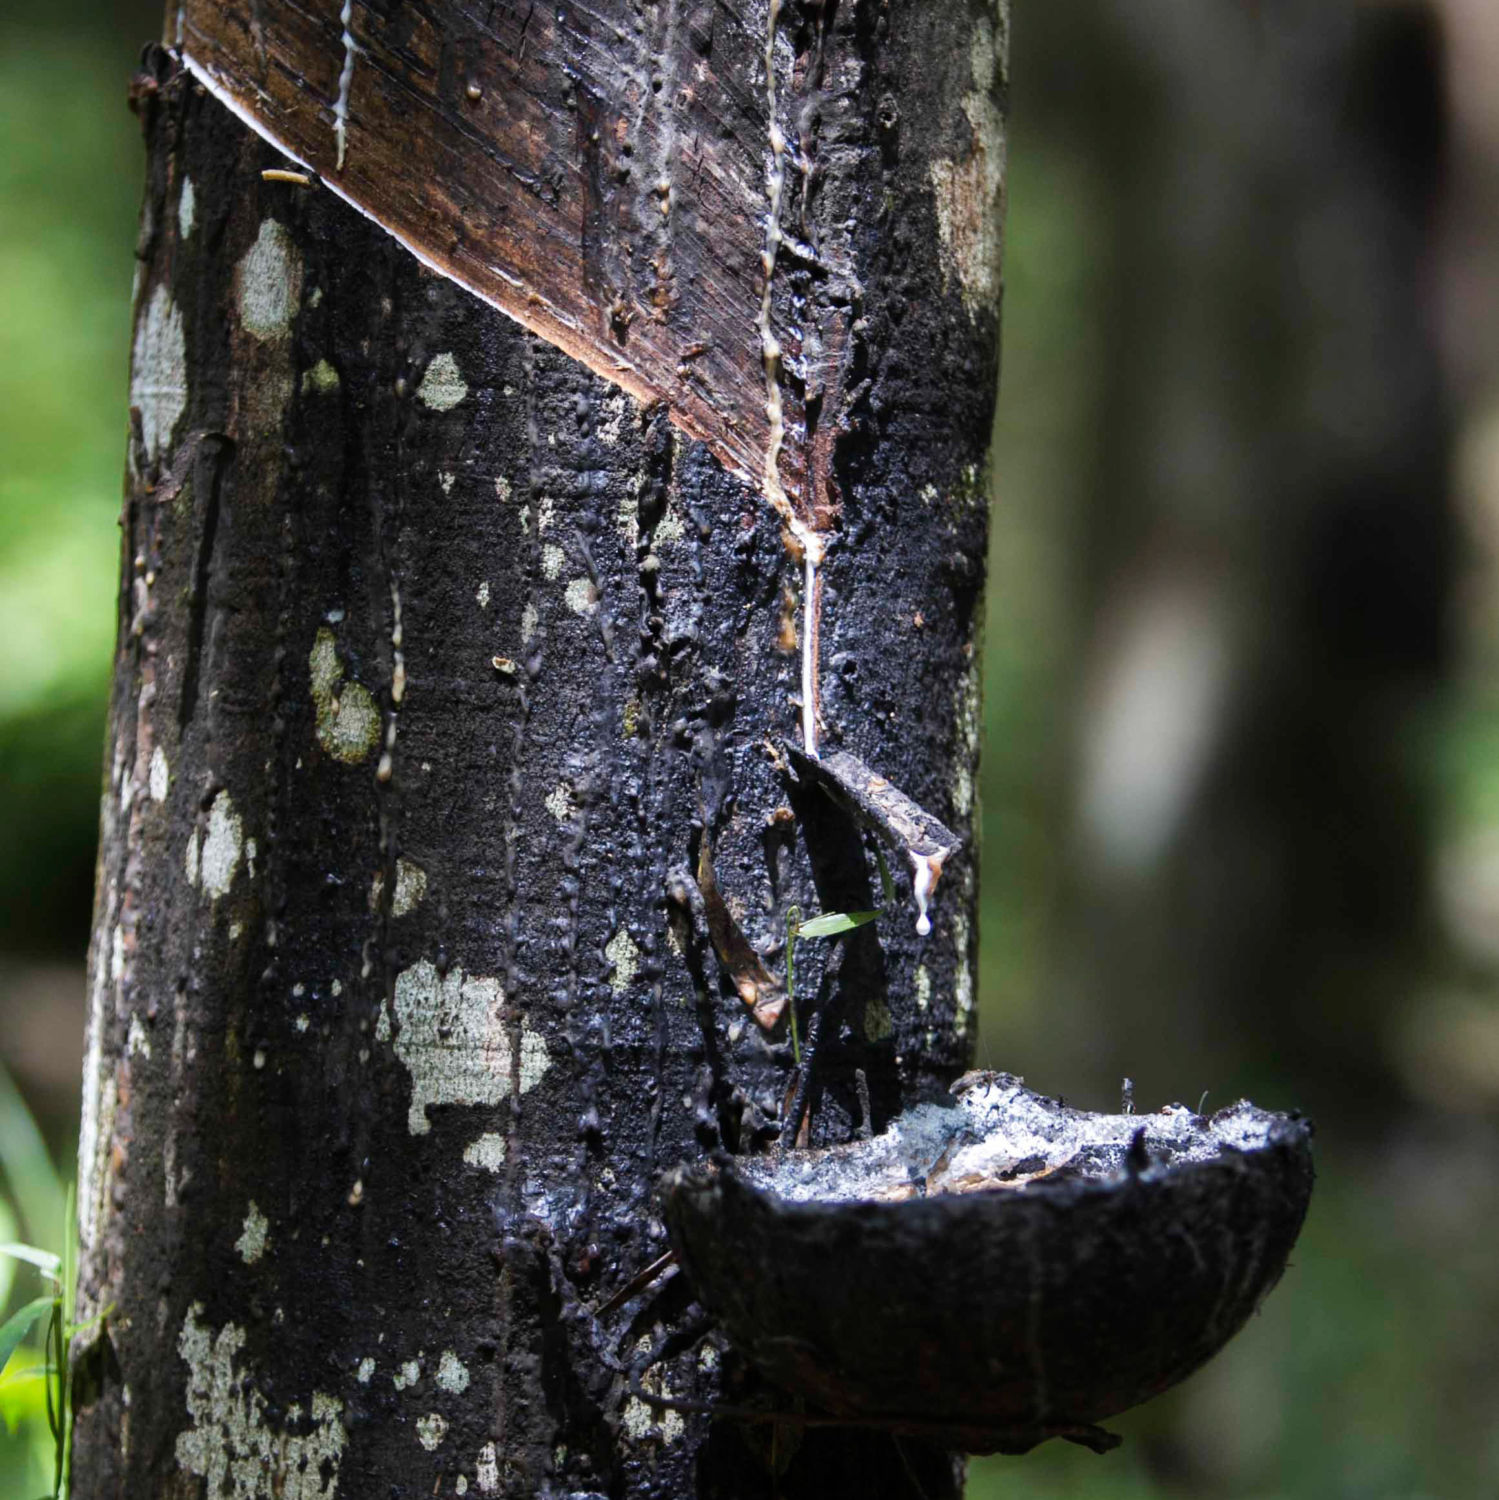 How Mounting Demand for Rubber Is Driving Tropical Forest Loss - Yale E360